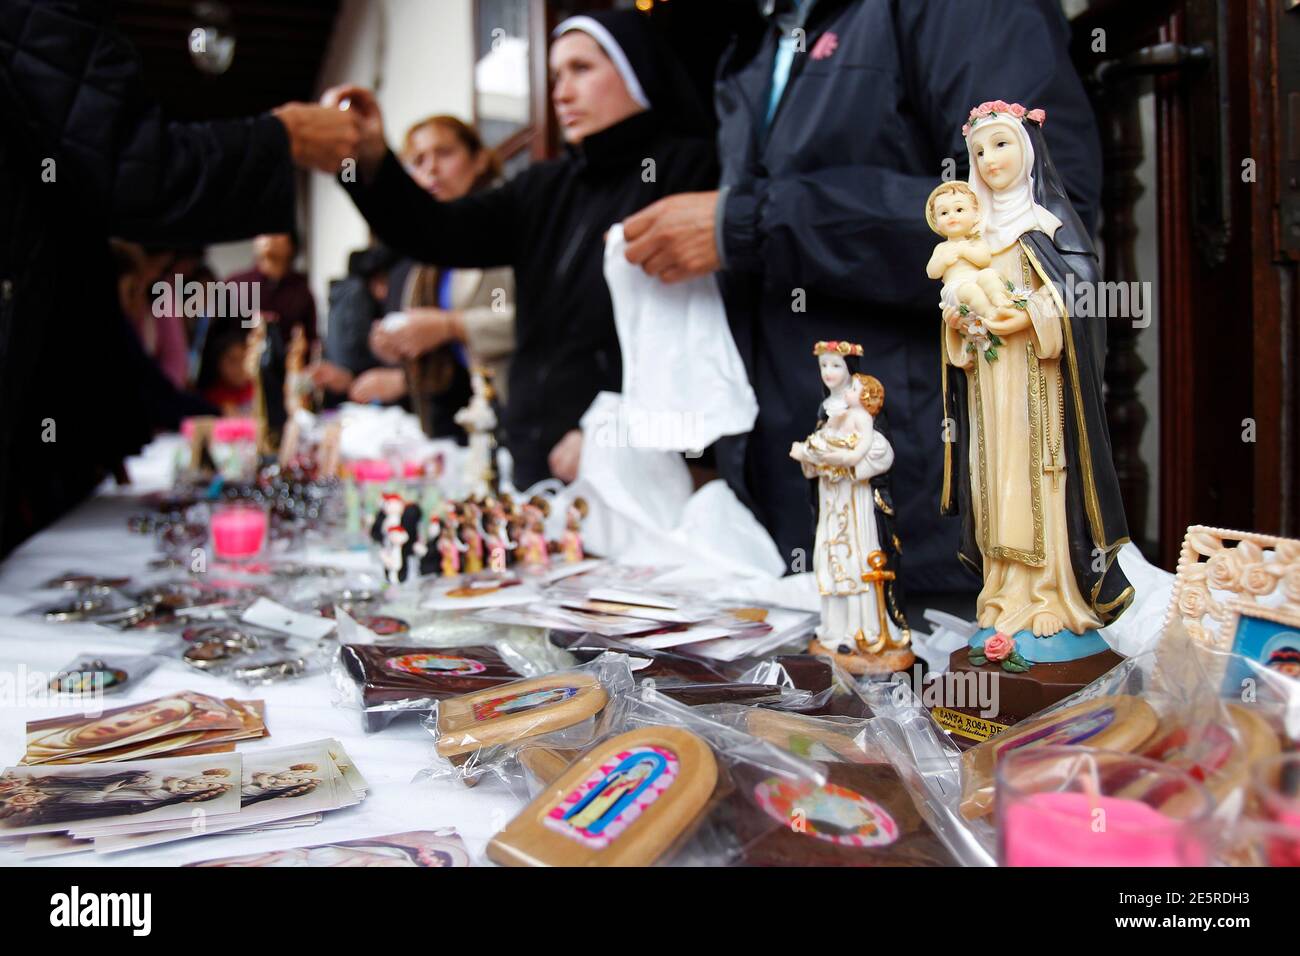 Souvenirs of Saint Rose are sold at Saint Rose's Church during her  anniversary celebrations in Lima, August 30, 2013. Thousands of people  visit the sanctuary every year with the hope of seeing